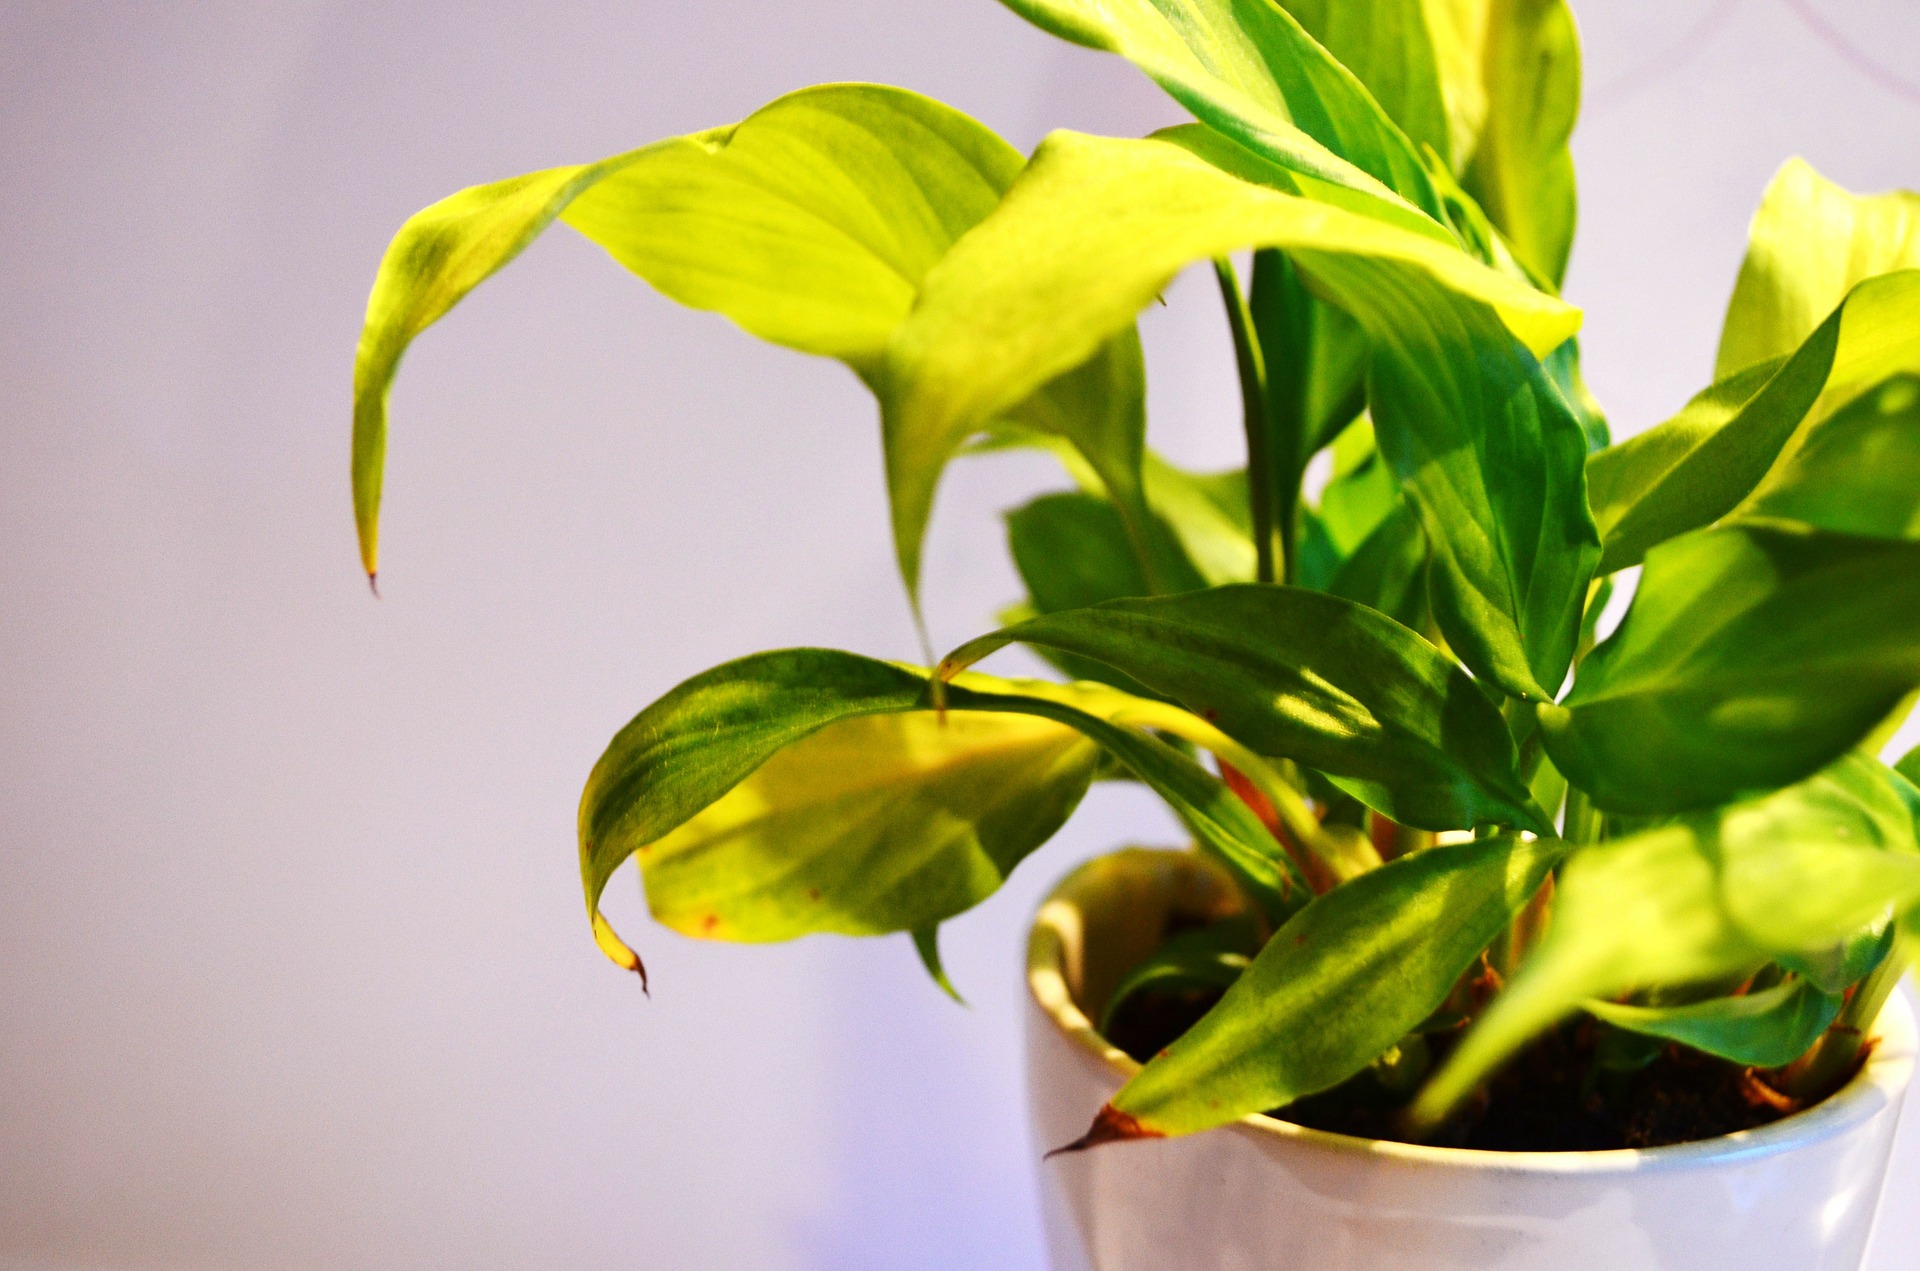 Does this indoor plant look like a threat to you? Photo: Pixabay